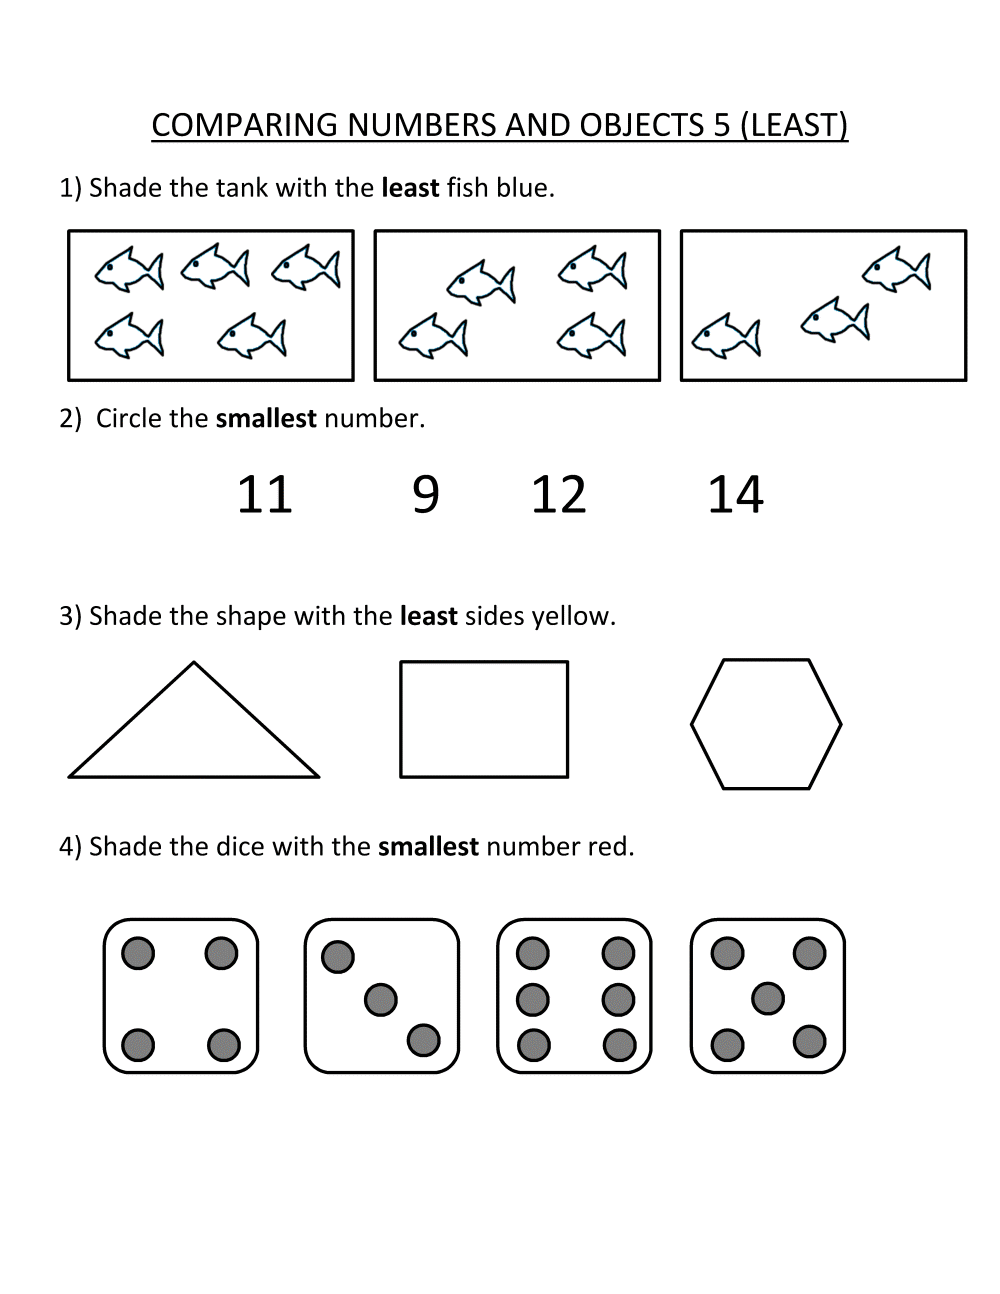 printable maths worksheets for 1st class ireland